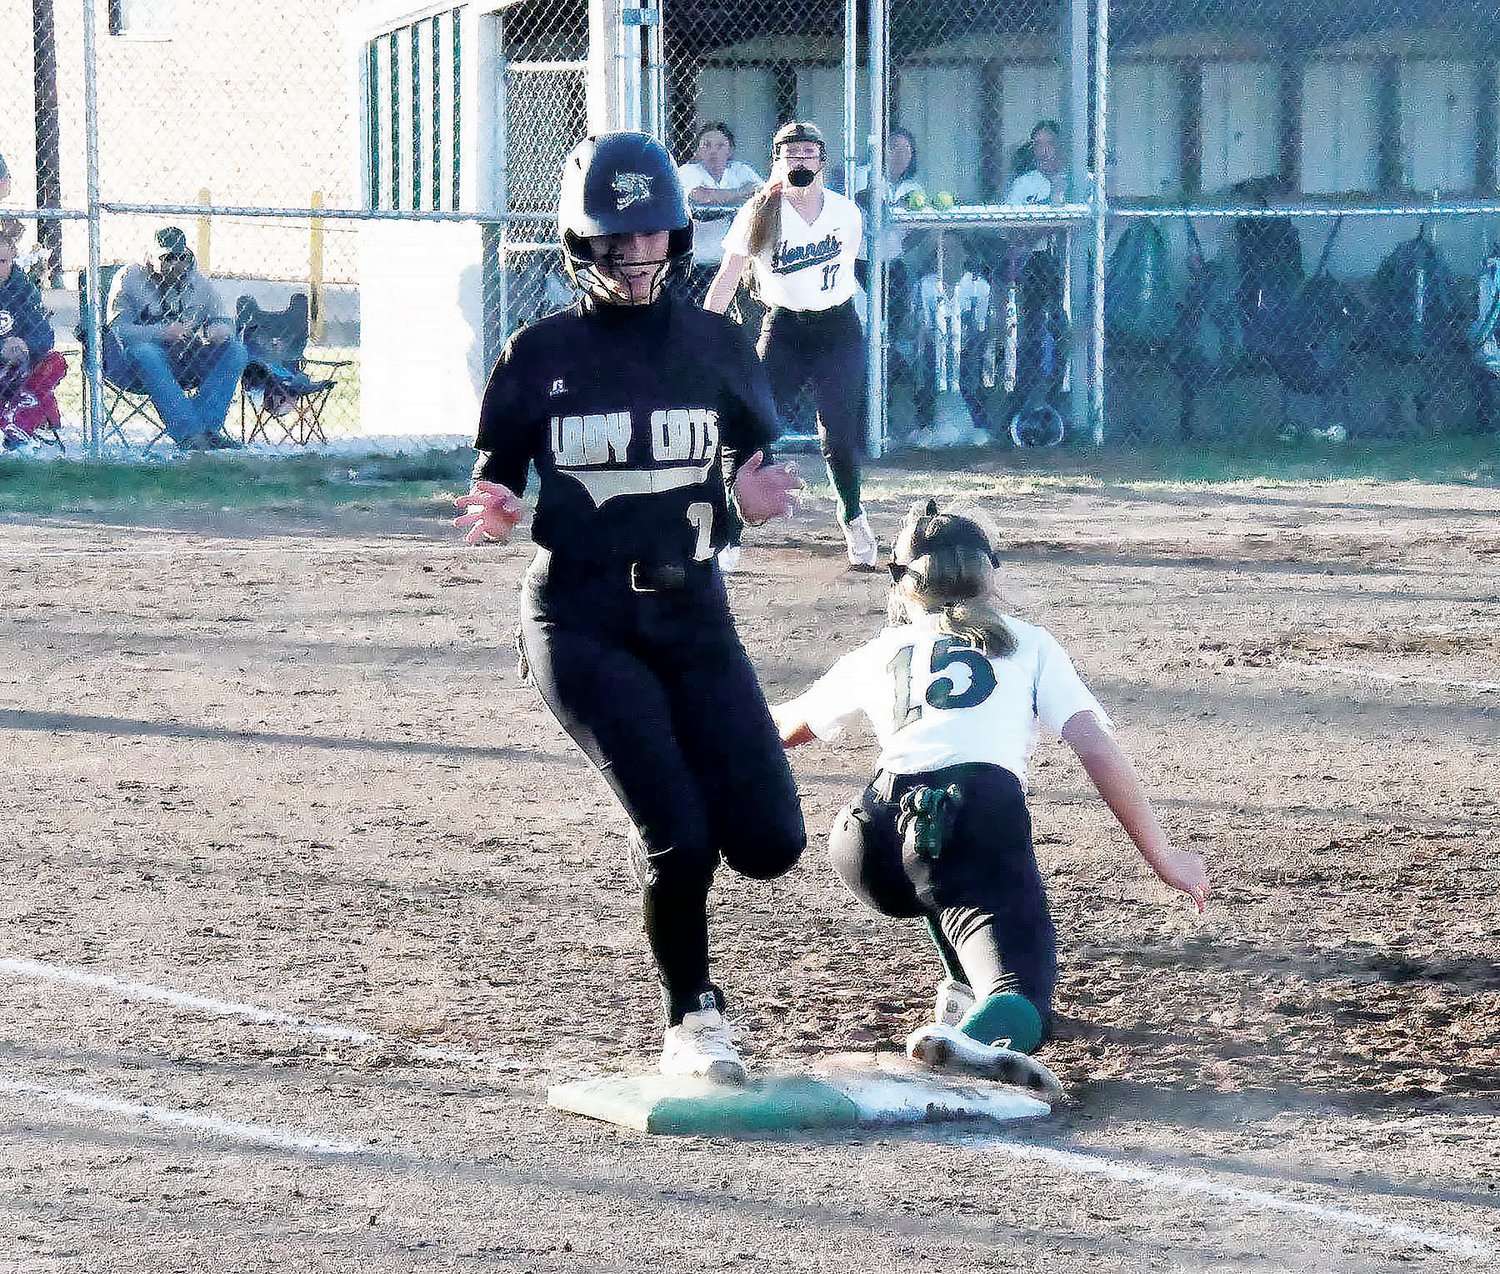 Cairo High School softball player Avery Brumley (black jersey) beats the throw to first base during a Class 1 District 8 semifinal game versus Westran at Kelly Odneal Field in Huntsville. Brumley used her speed to produce an eye-popping on-base percentage this season.